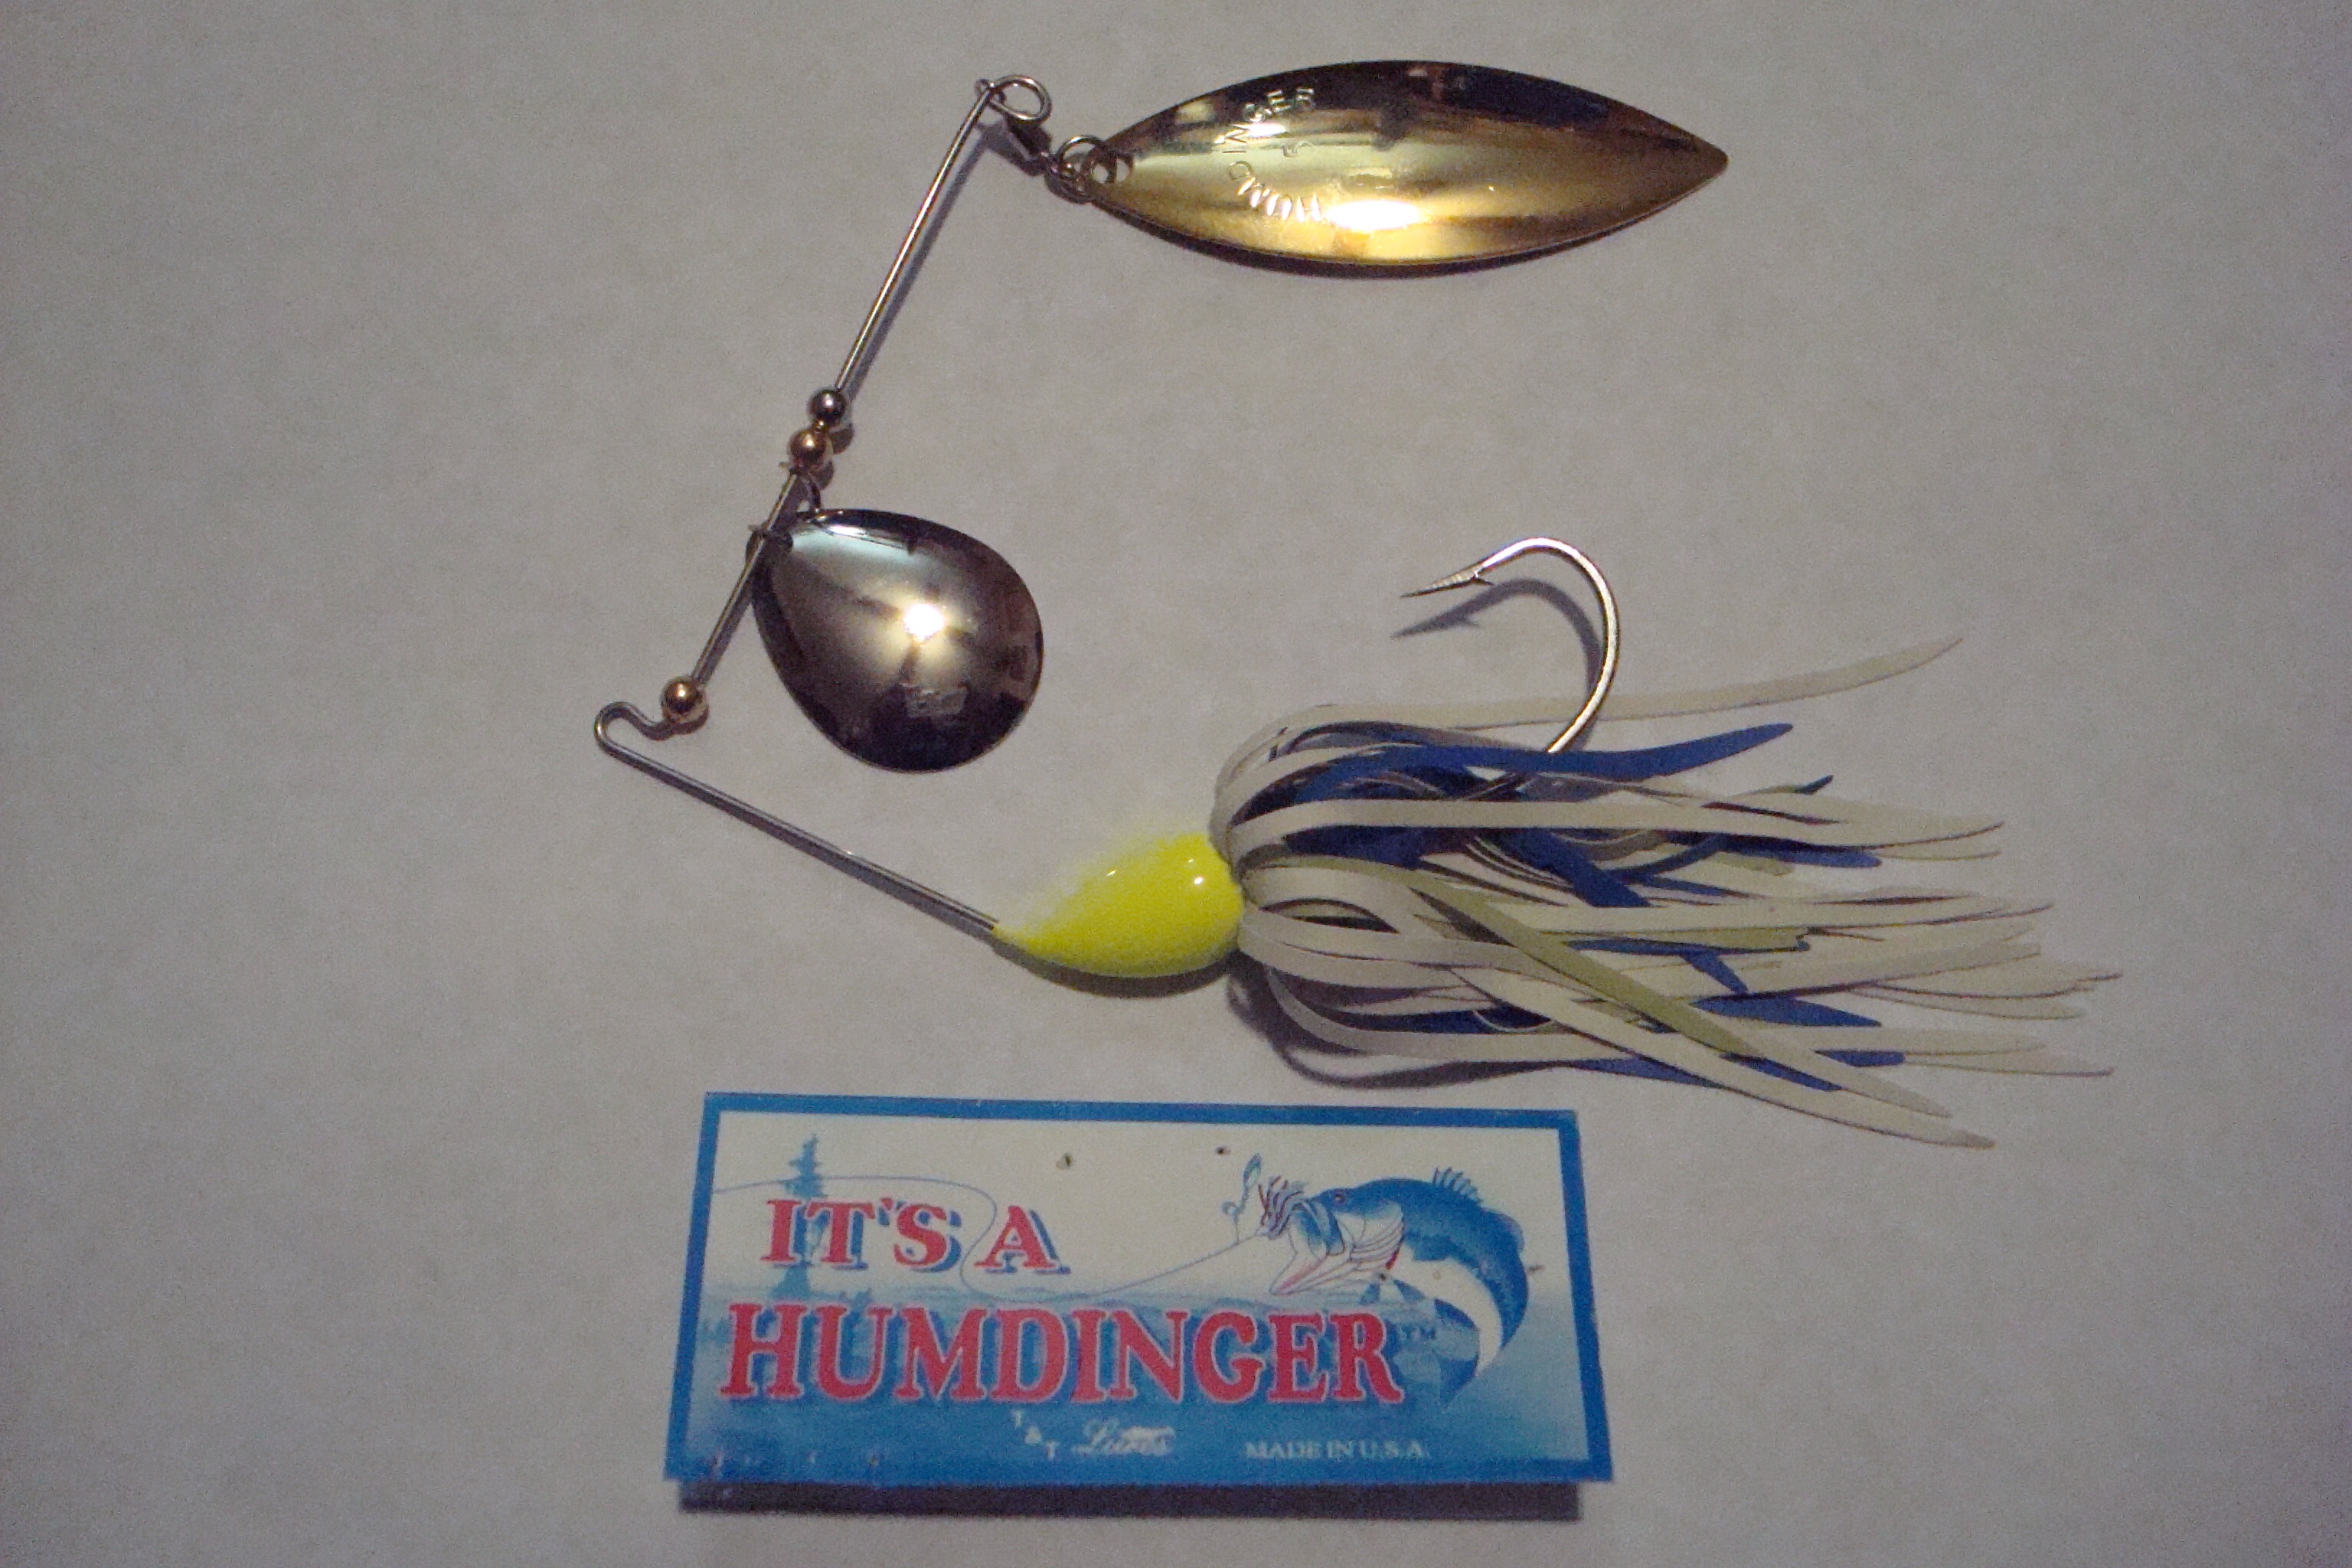 Spring spinnerbaiting: what are you throwing? - Page 2 - Fishing